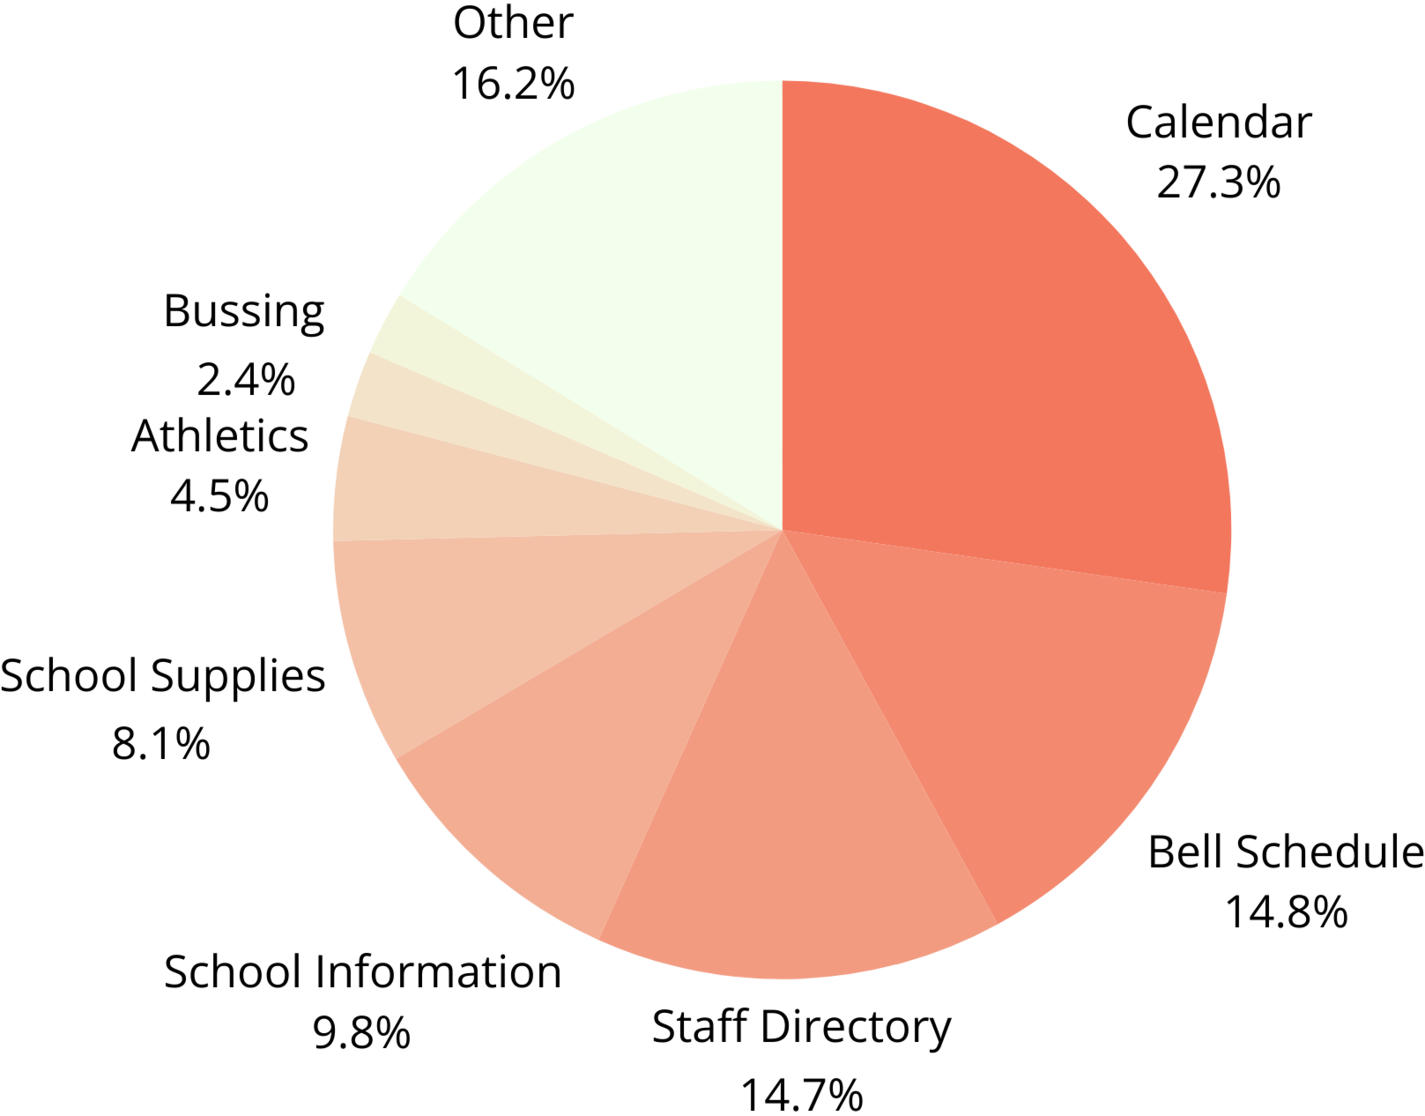 A pie chart showing the top searches on school websites.